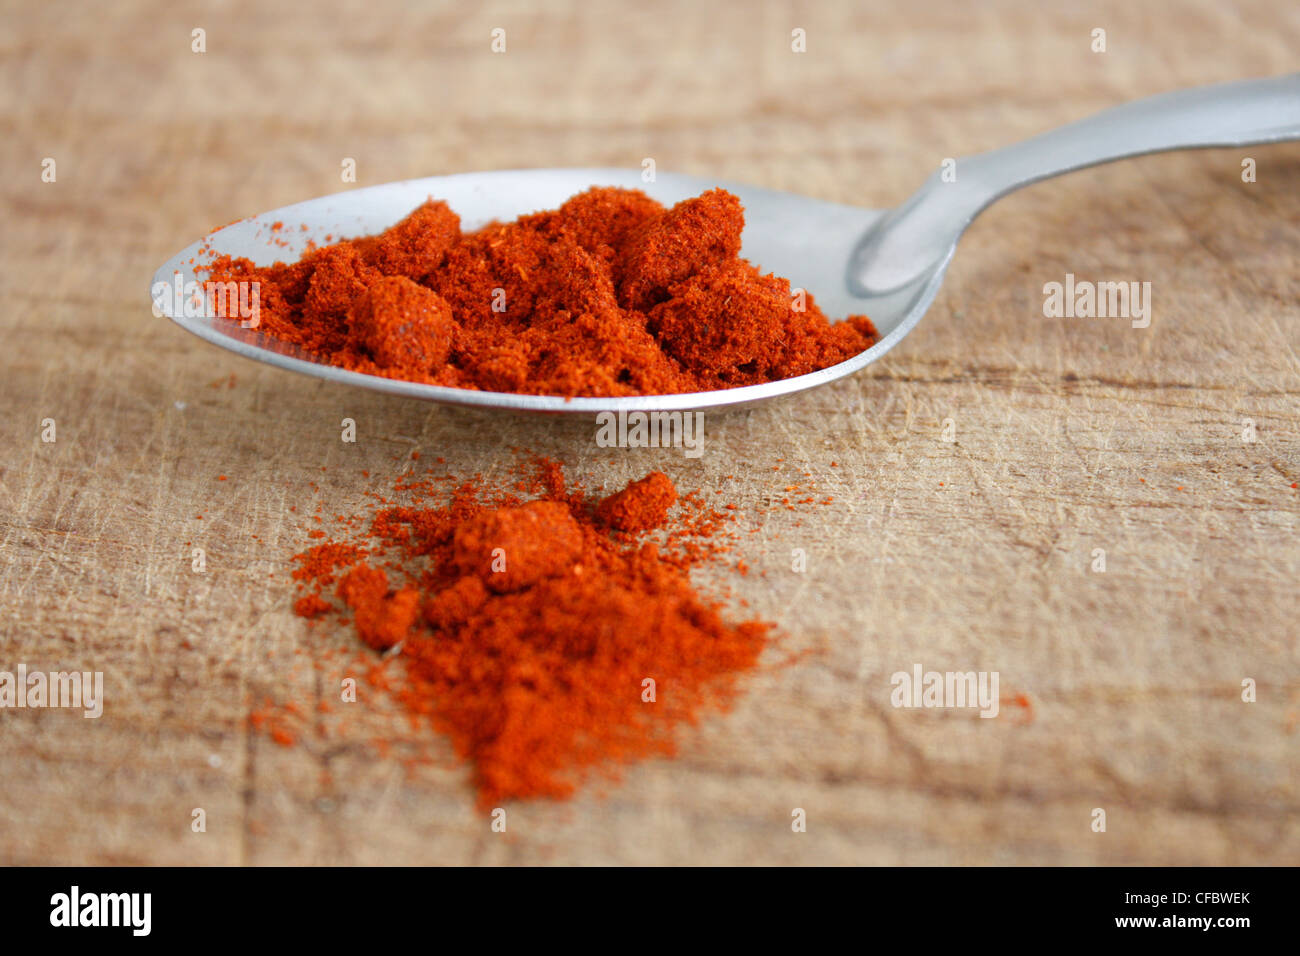 Paprika on a wooden surface Banque D'Images